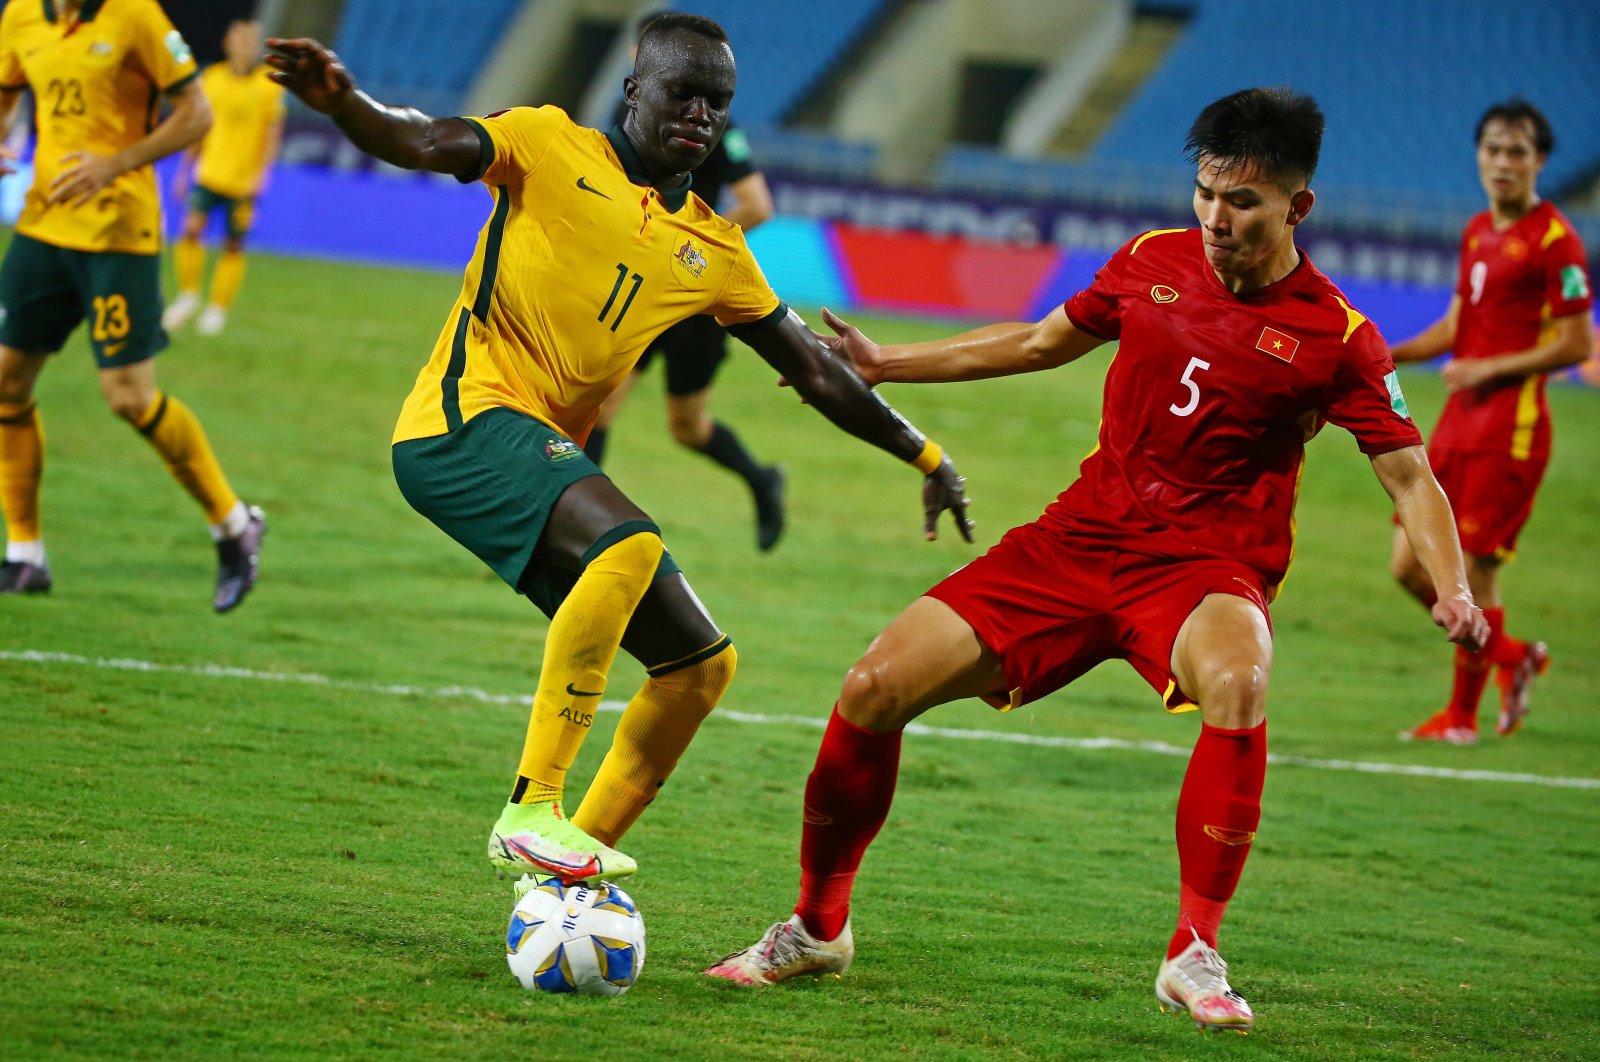 Vietnam's Nguyen Thanh Binh (R) in action against Australia's Awer Mabil (L) during the final round of the 2022 FIFA World Cup Asian qualifiers in Hanoi, Vietnam, Sept. 7, 2021. (EPA Photo)